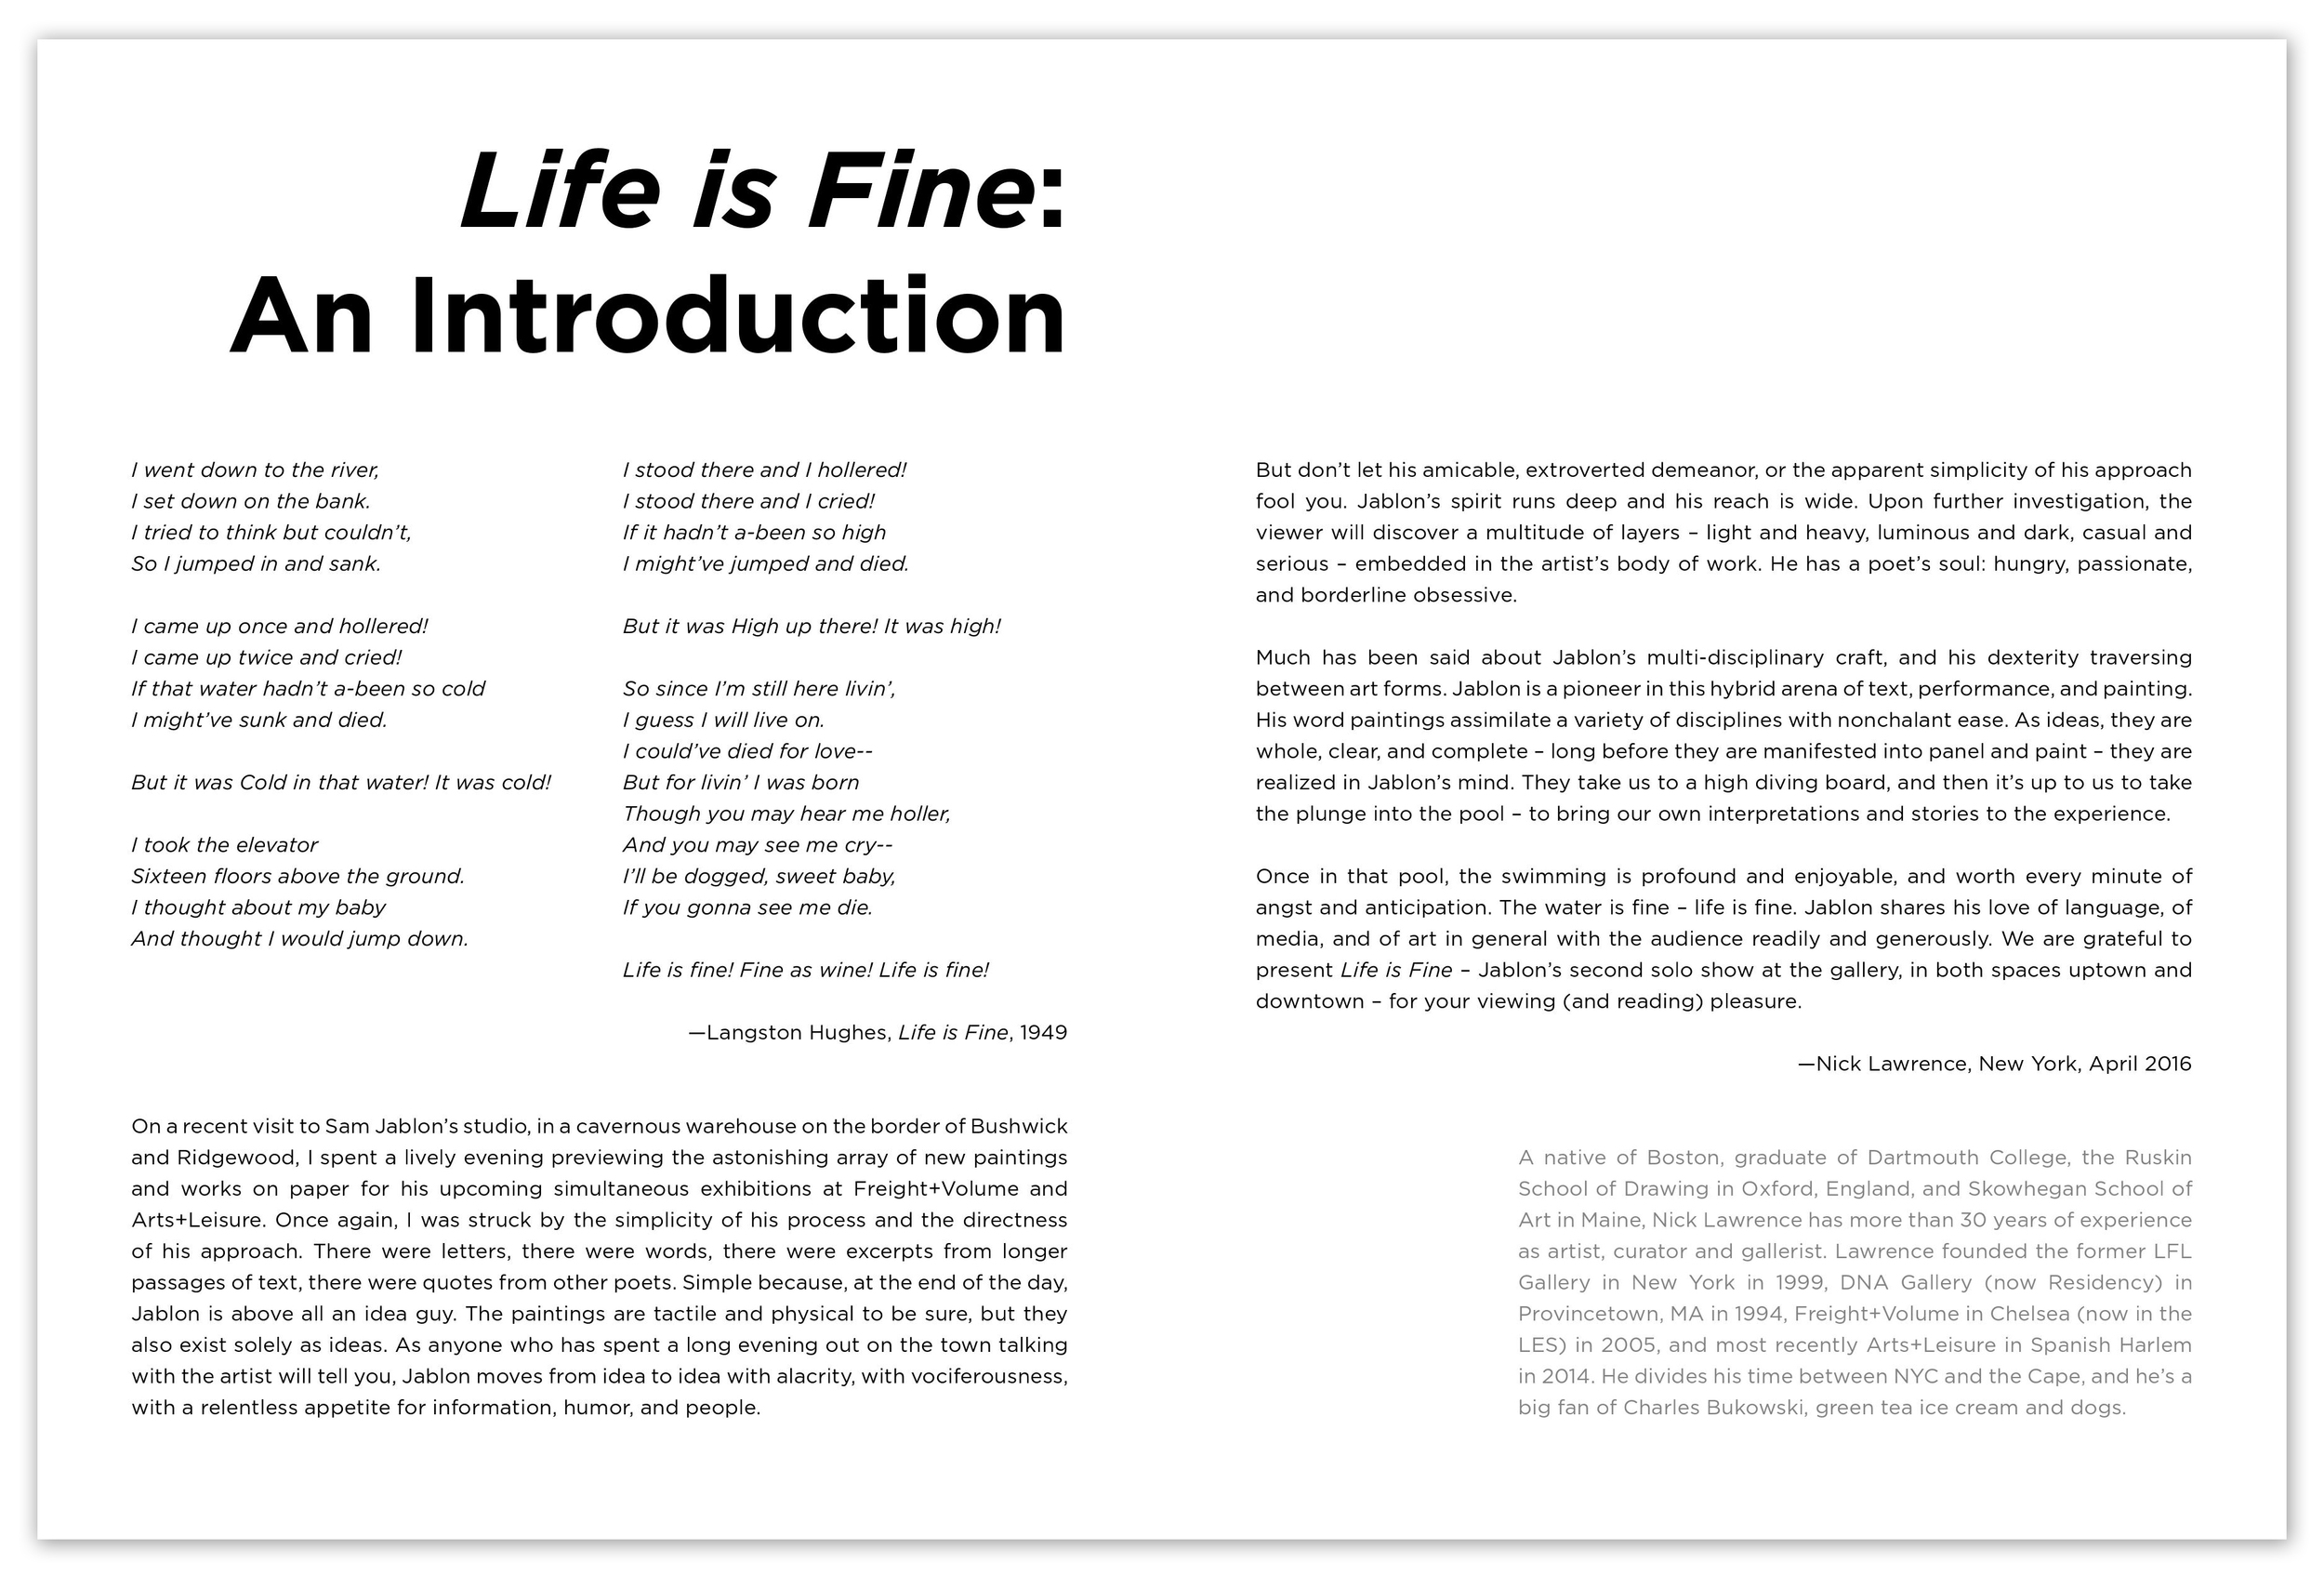 life is fine by langston hughes